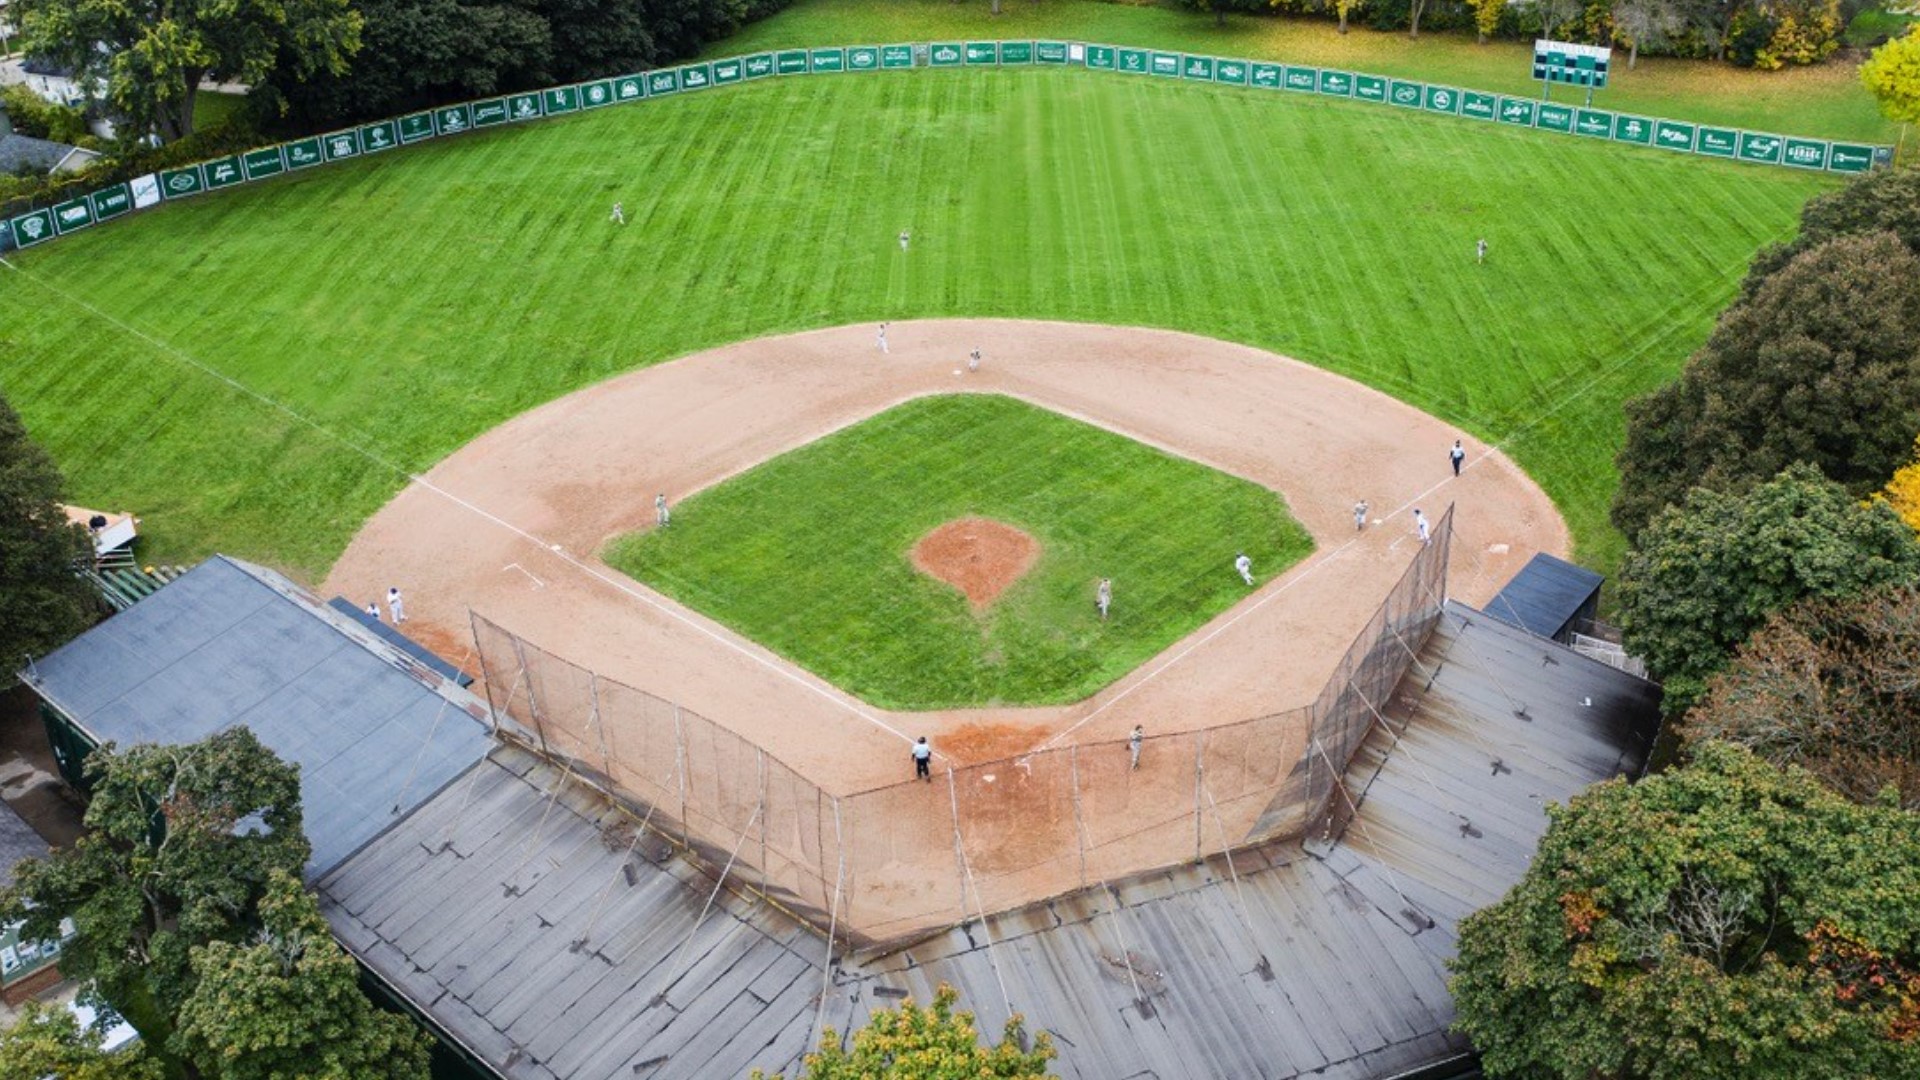 A fundraising campaign is about to begin for Sullivan Field, formerly known as Valley Field, on the west side of Grand Rapids.